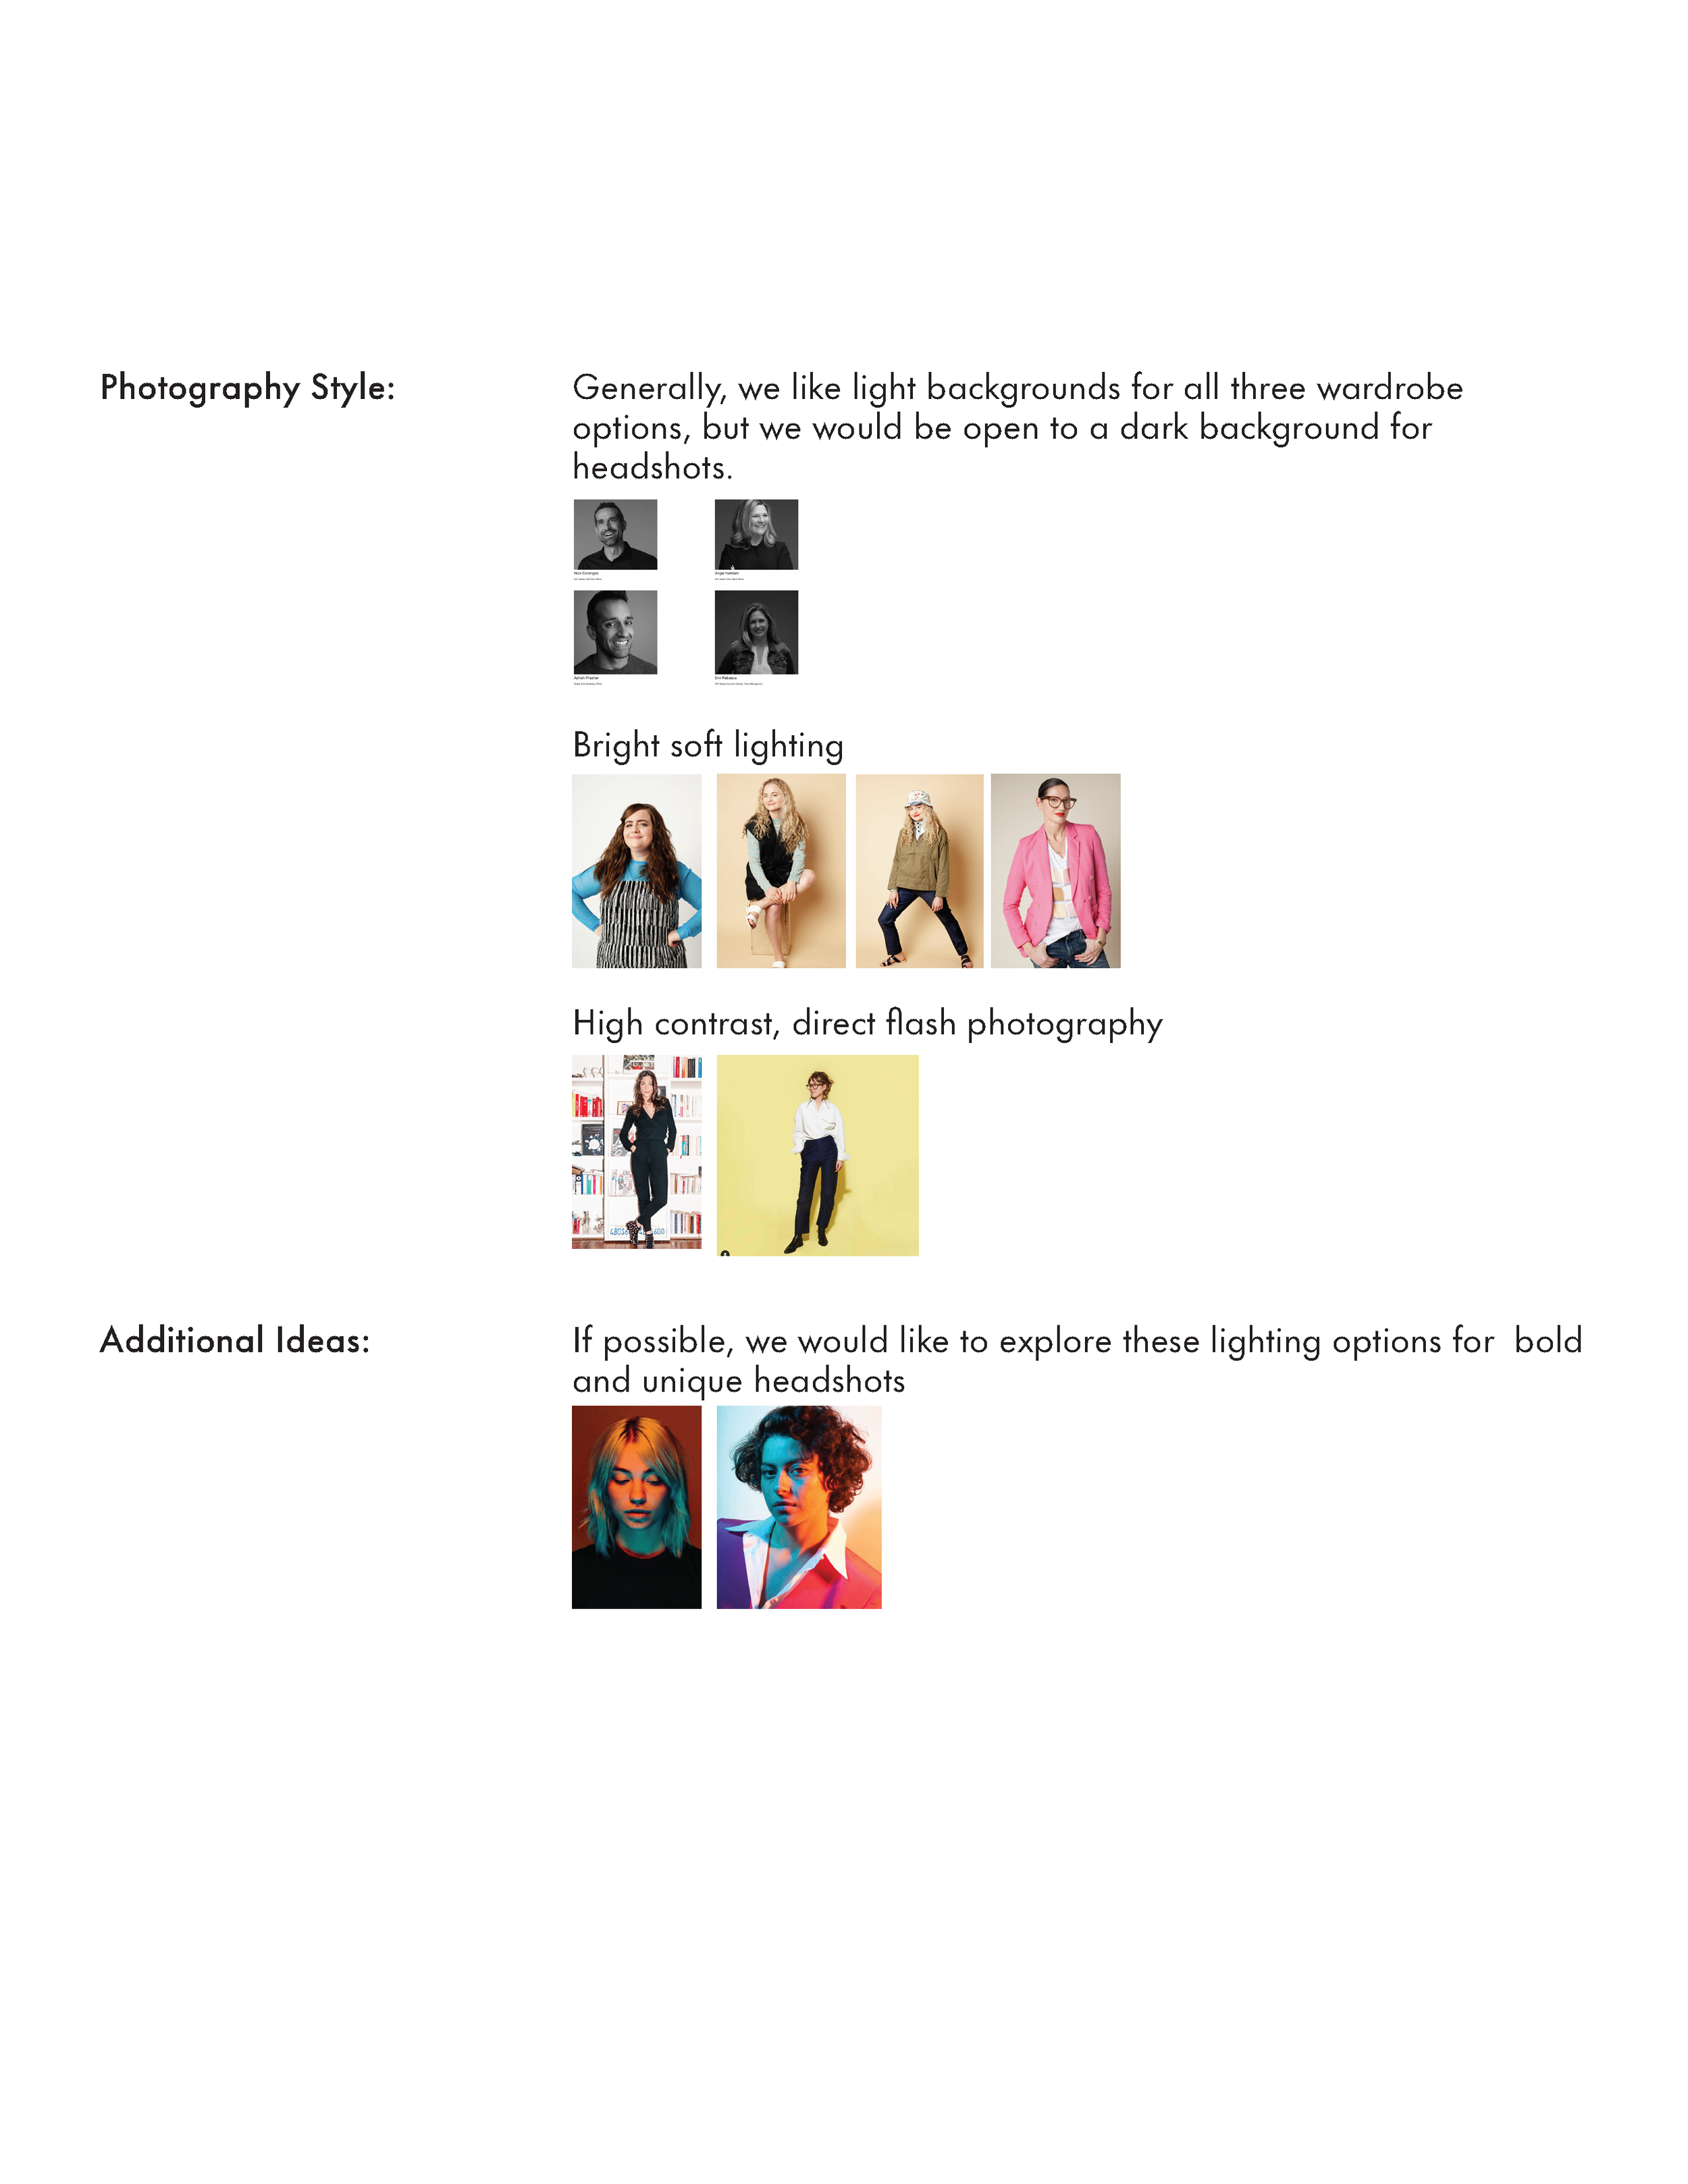 WorldgroupDesign_Photoshoot_Brief_Page_2.png